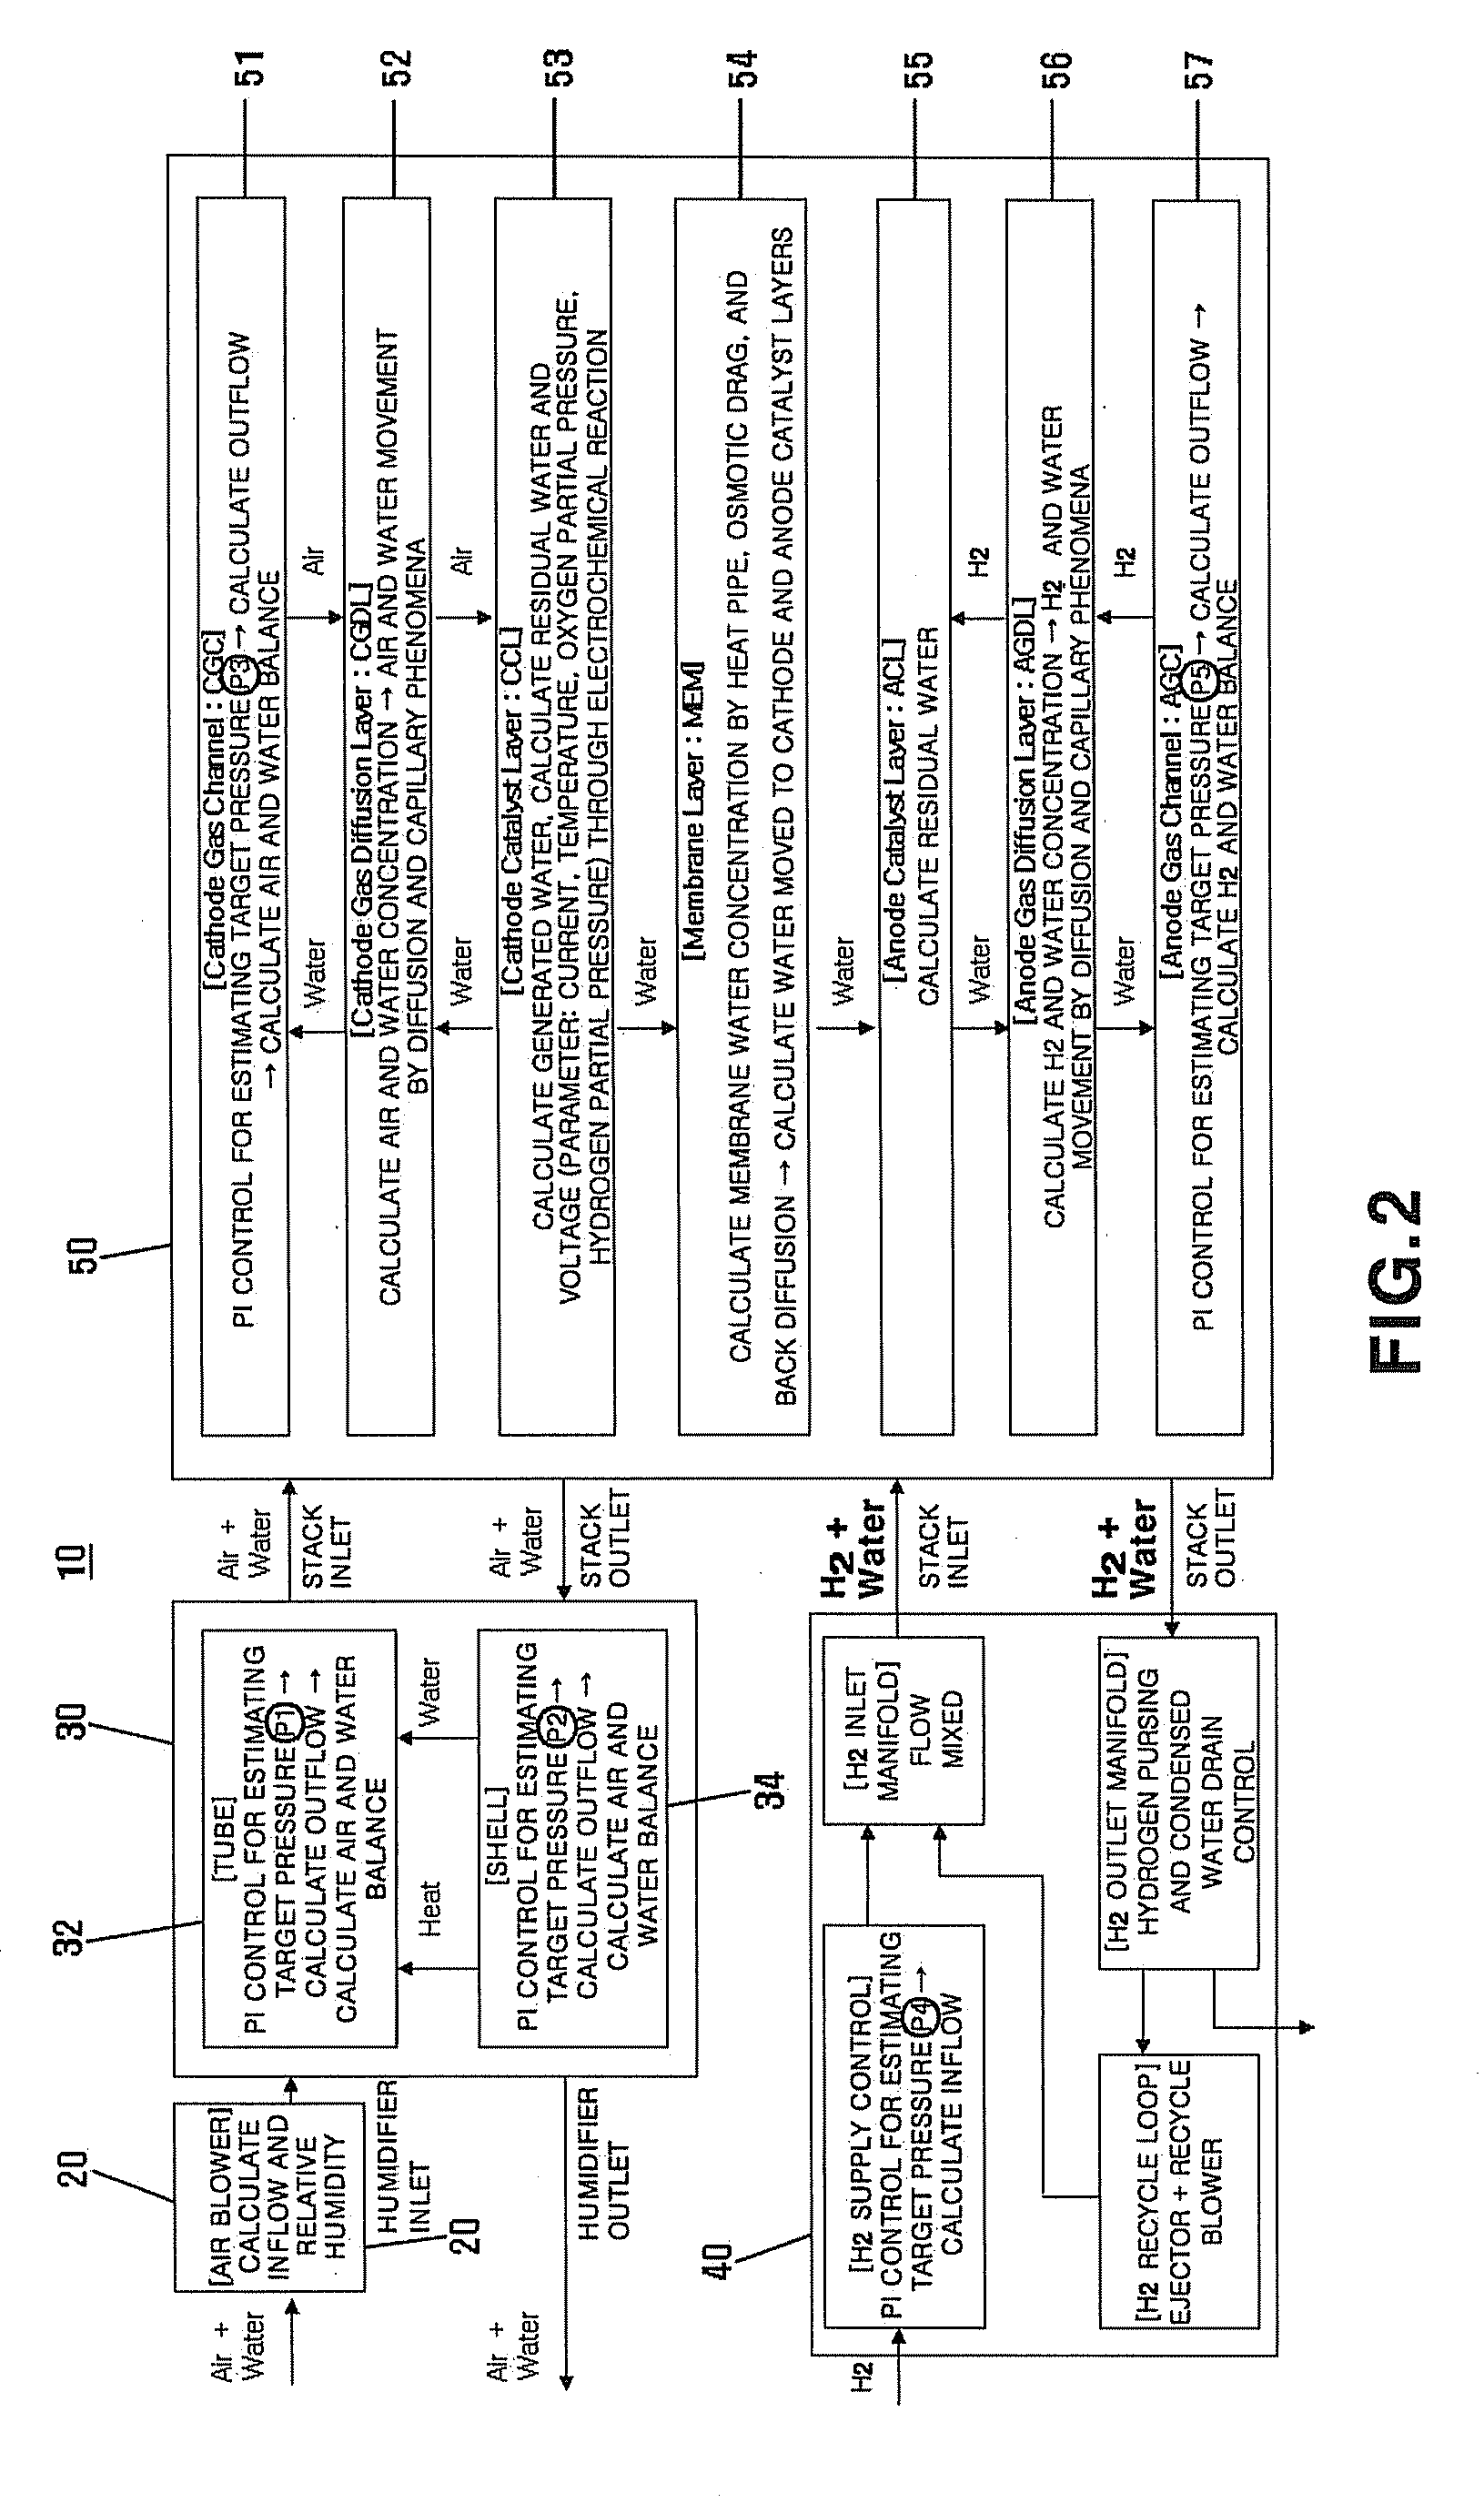 Controller for estimating relative humidity and condensed water, and method for controlling condensed water drain using the same